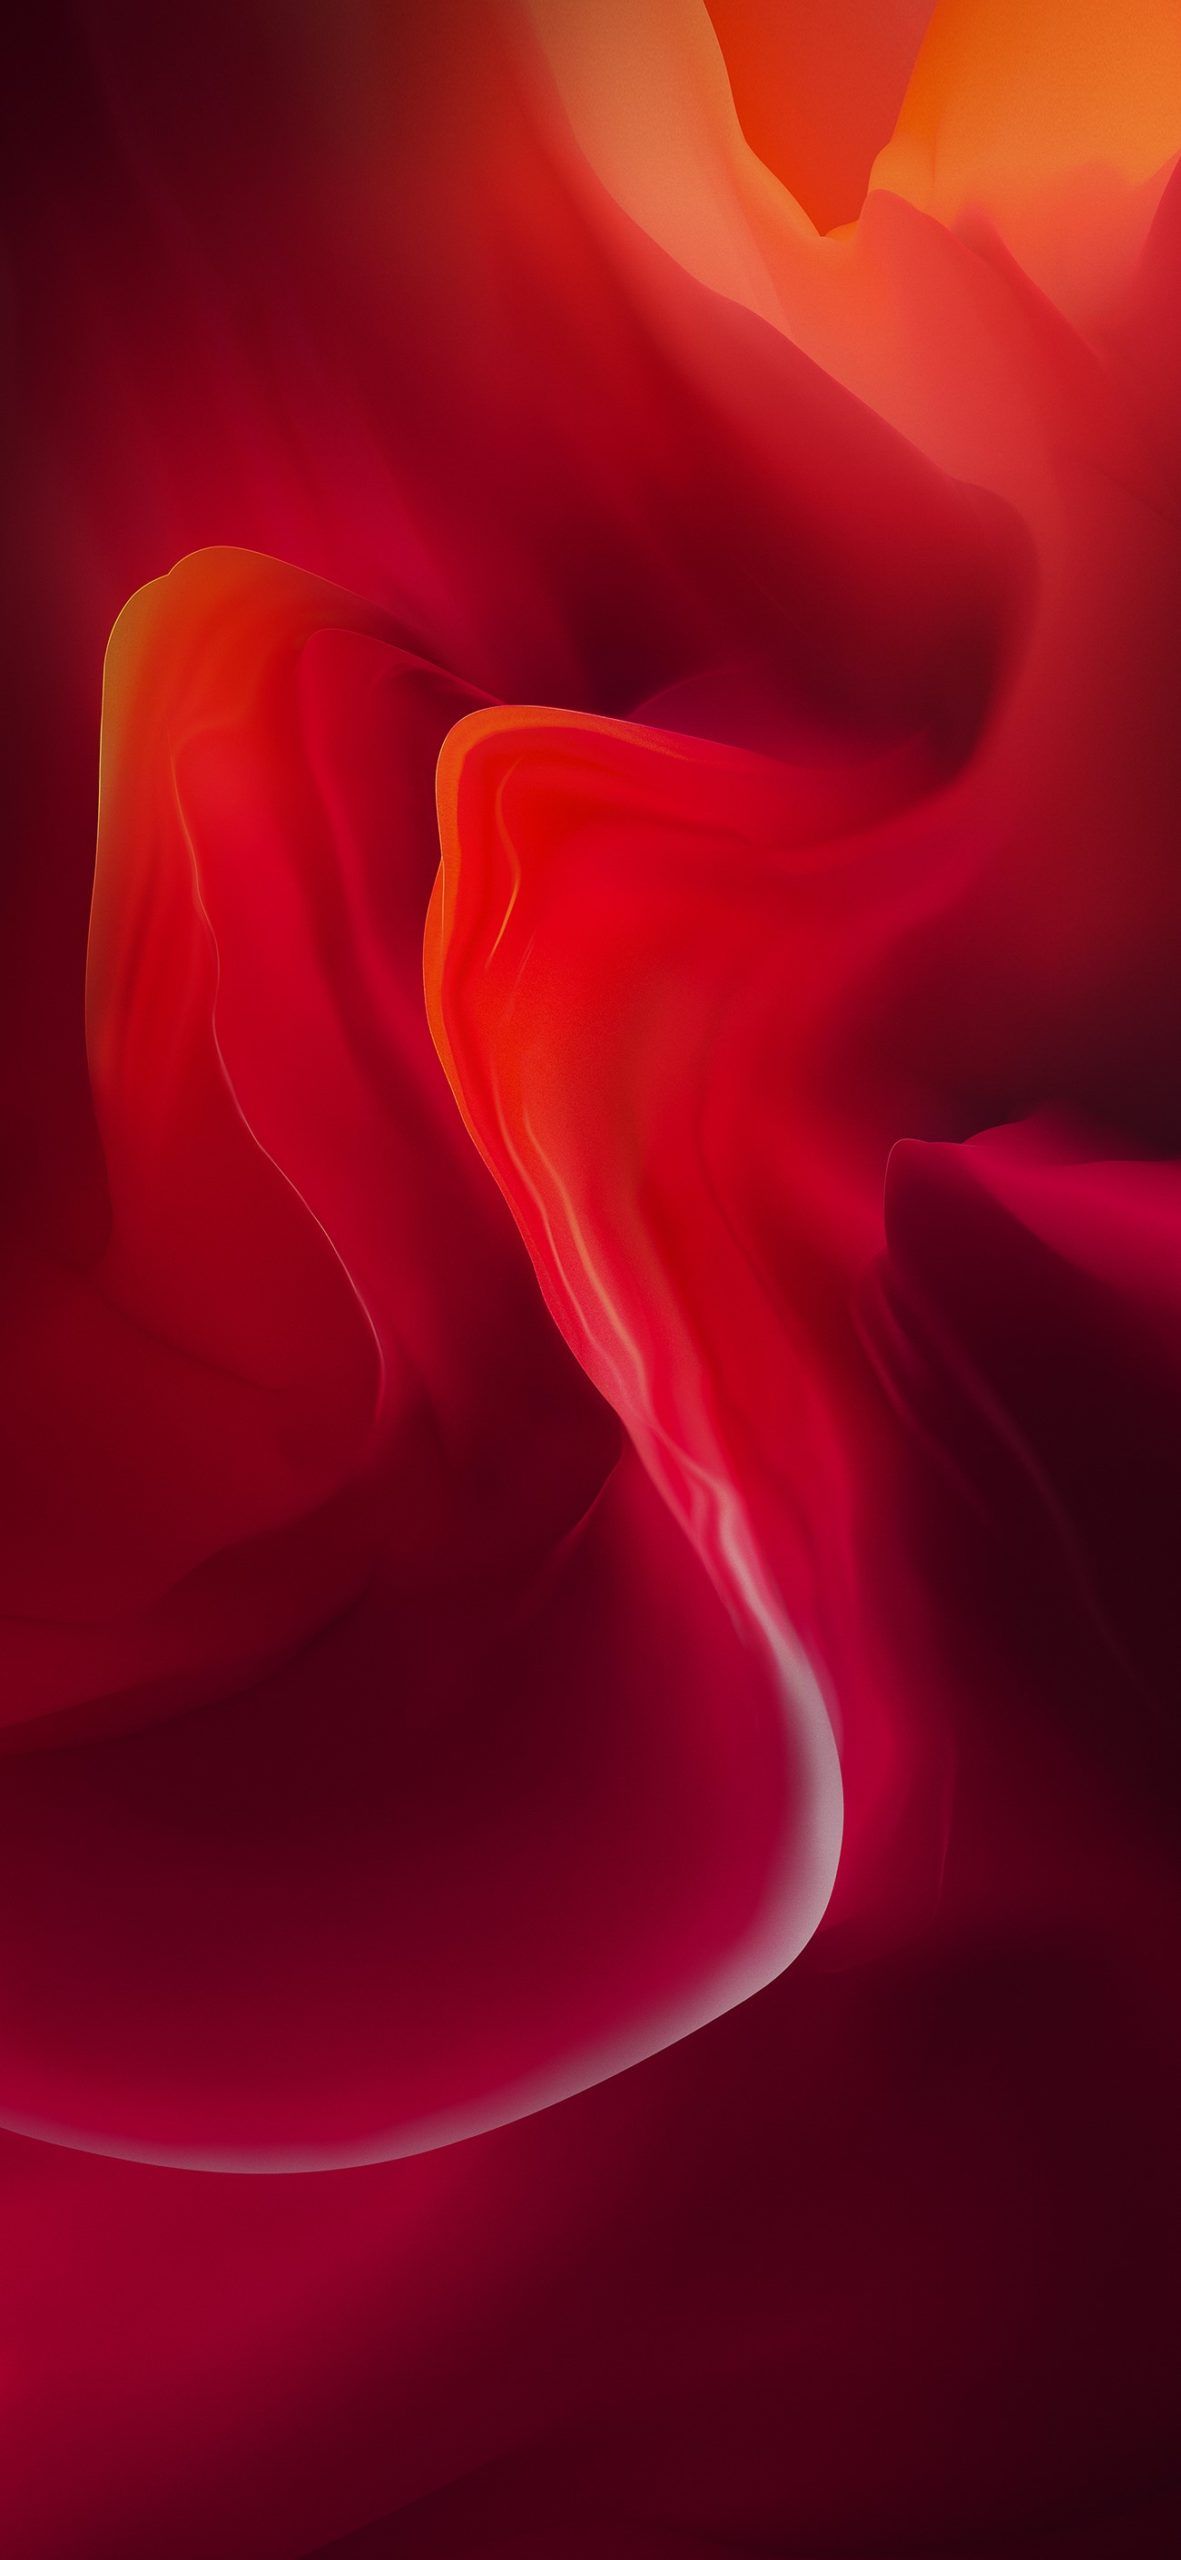 iPhone SE wallpapers 2020 edition